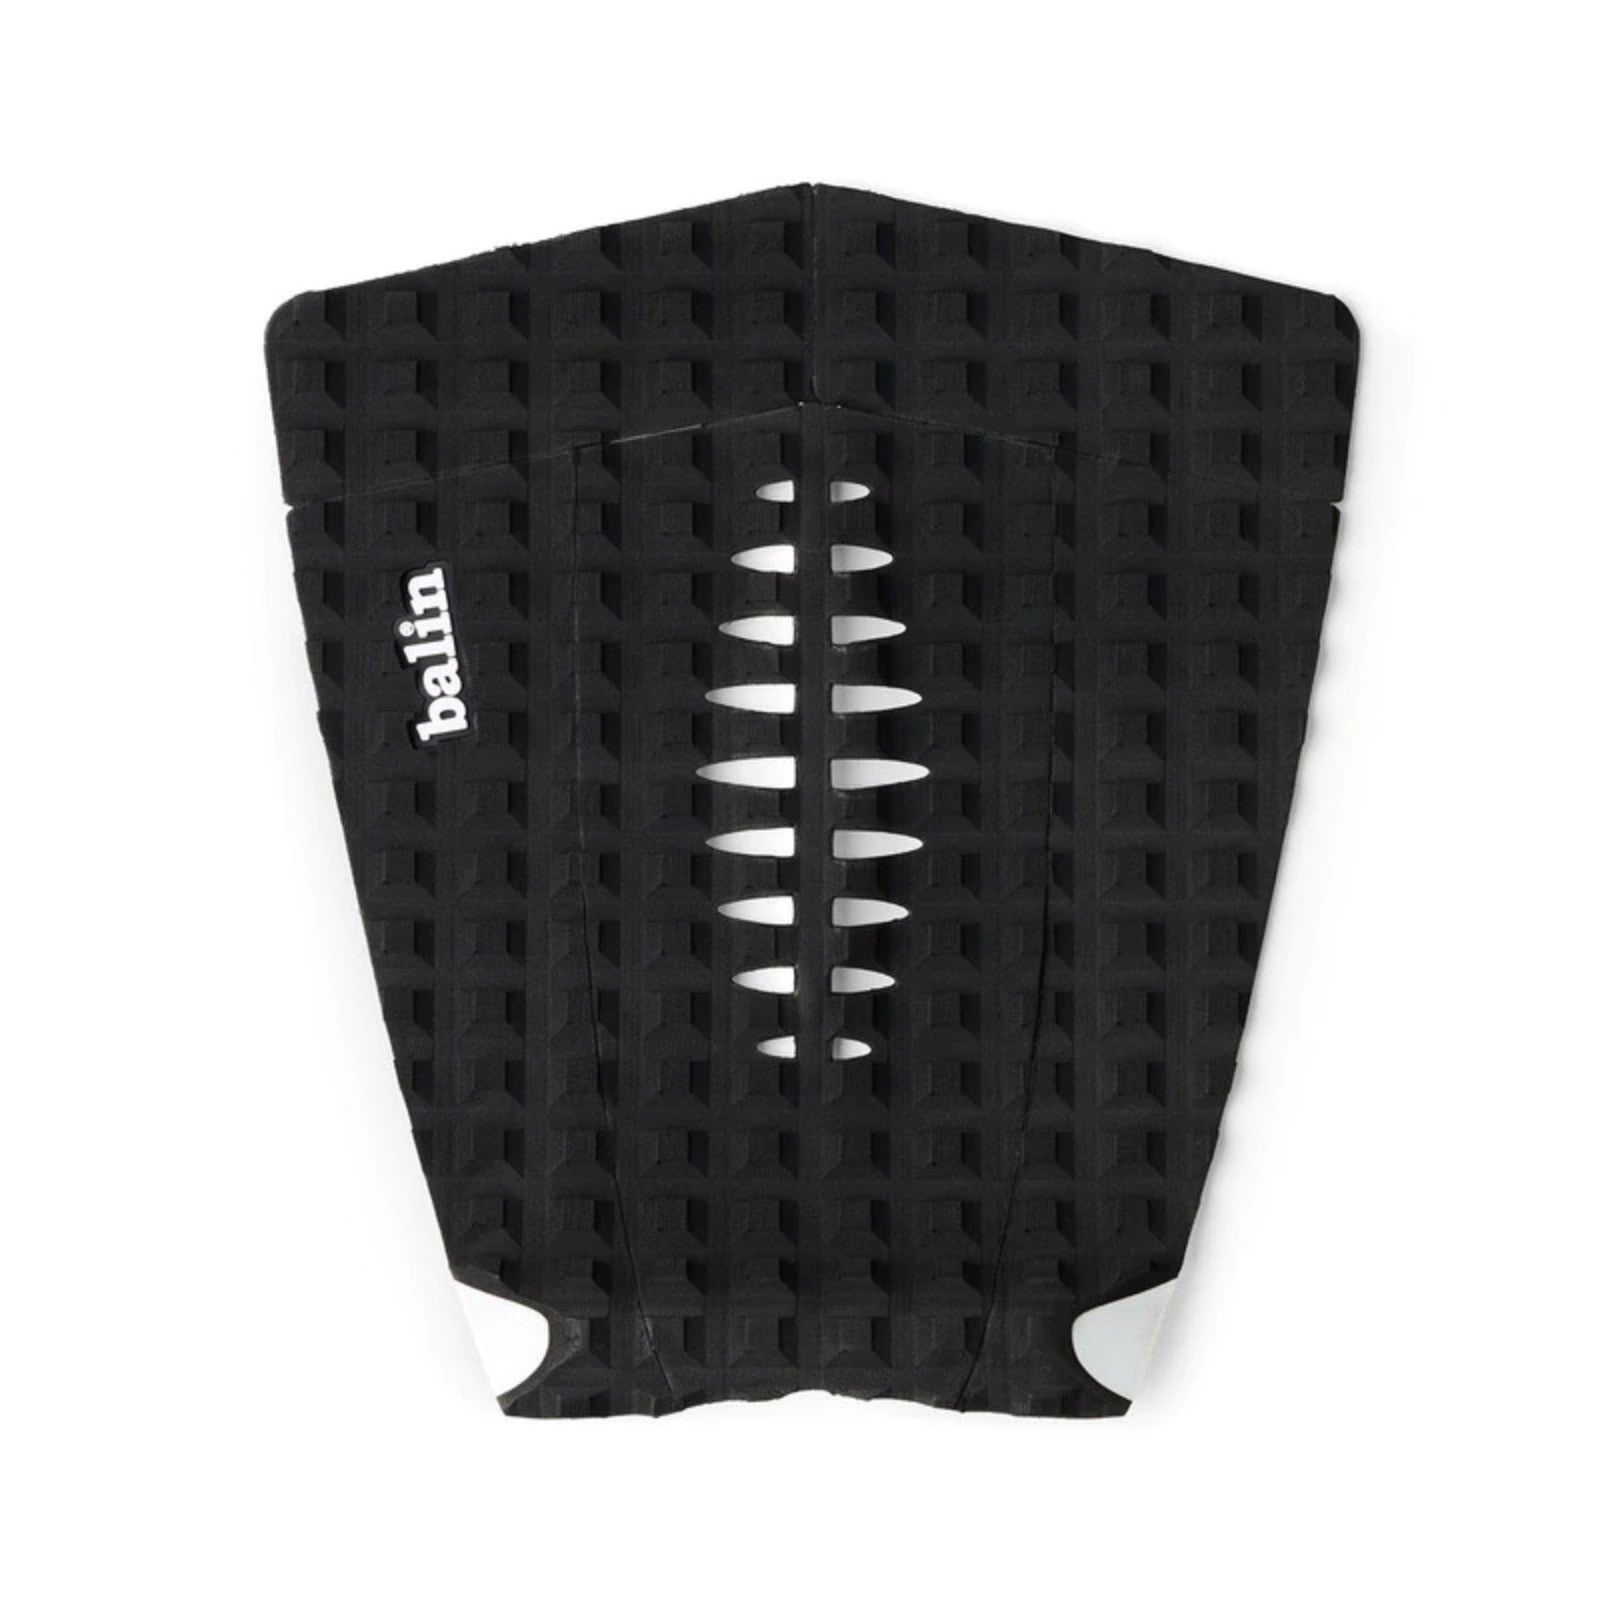 BALIN - Wide Ride Traction Pad Surf - Black / White